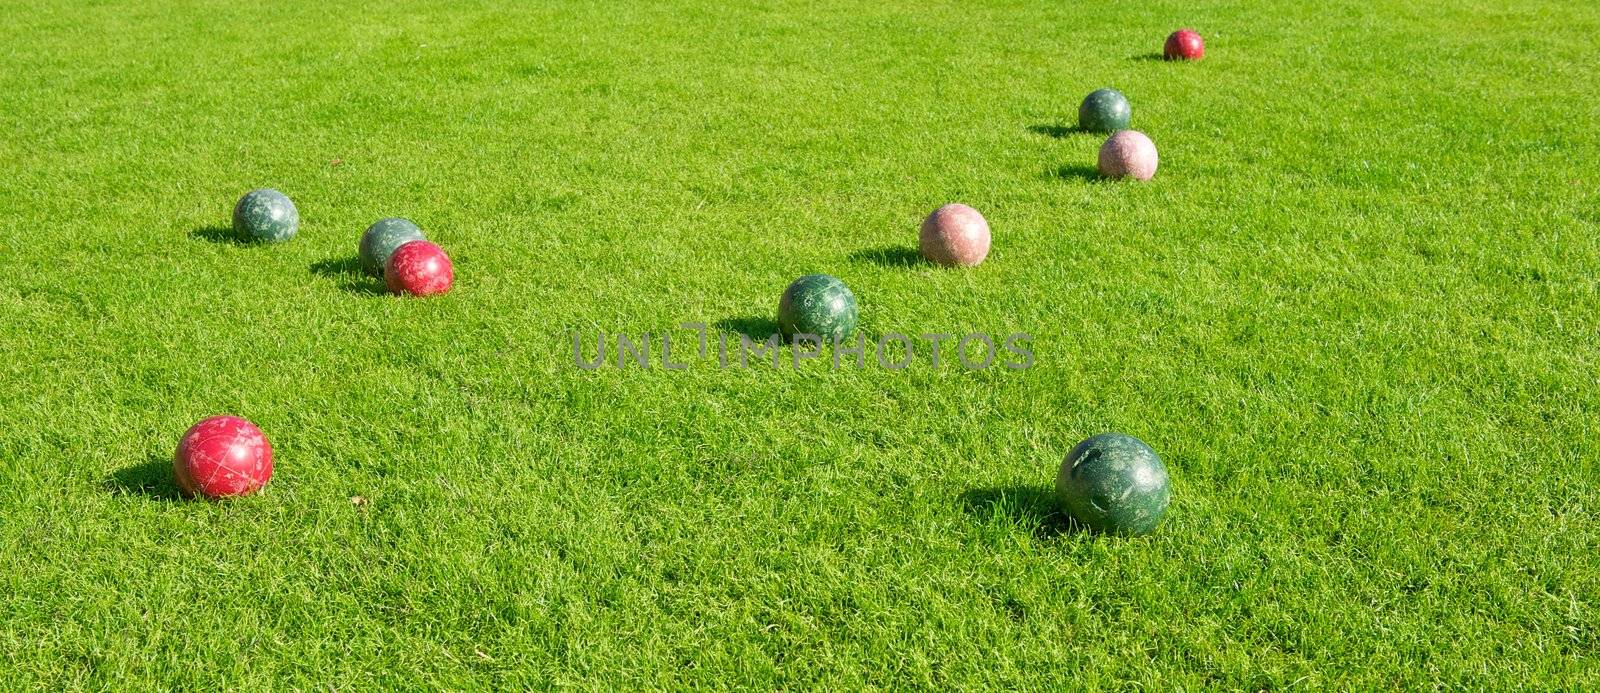 Grassy Area with Bocce Balls Game by pixelsnap